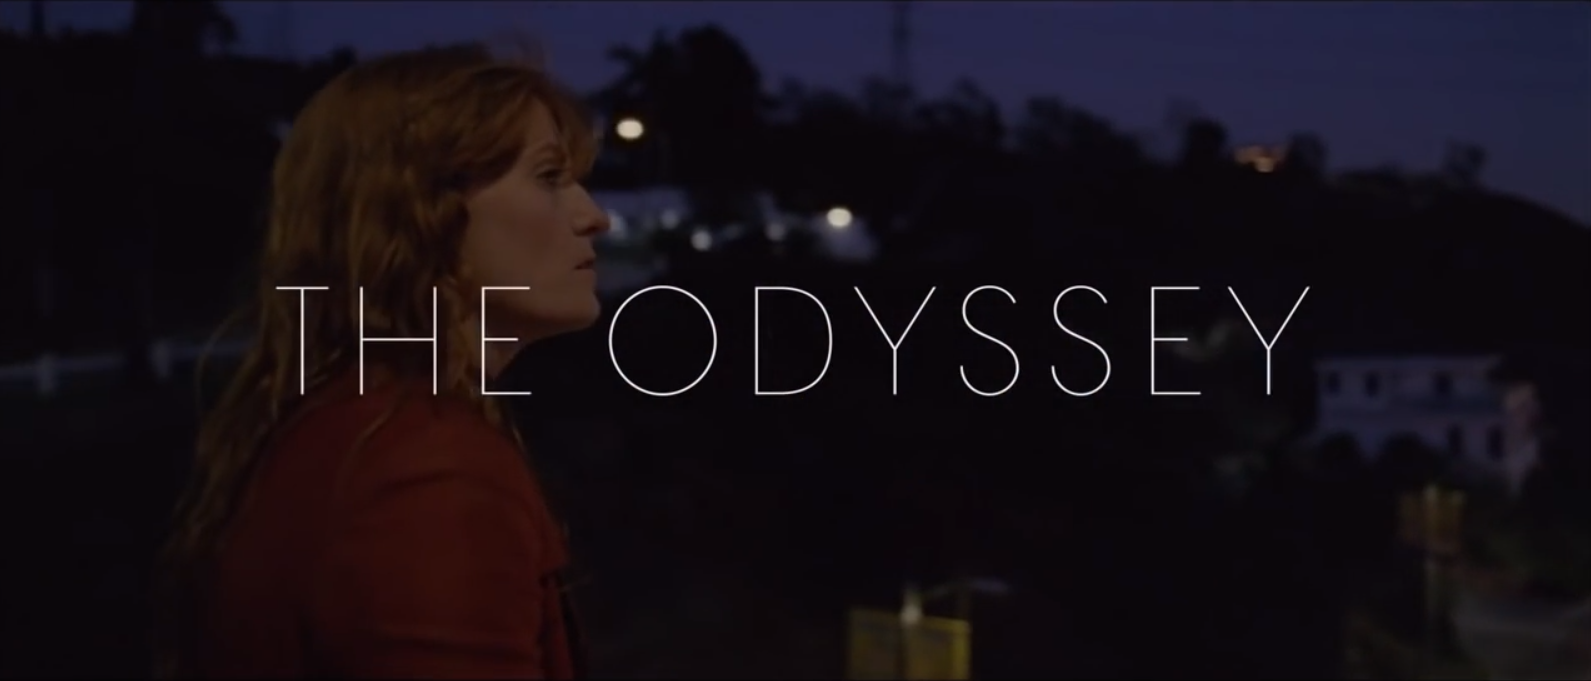 Florence and the Machine's short film "The Odyssey"